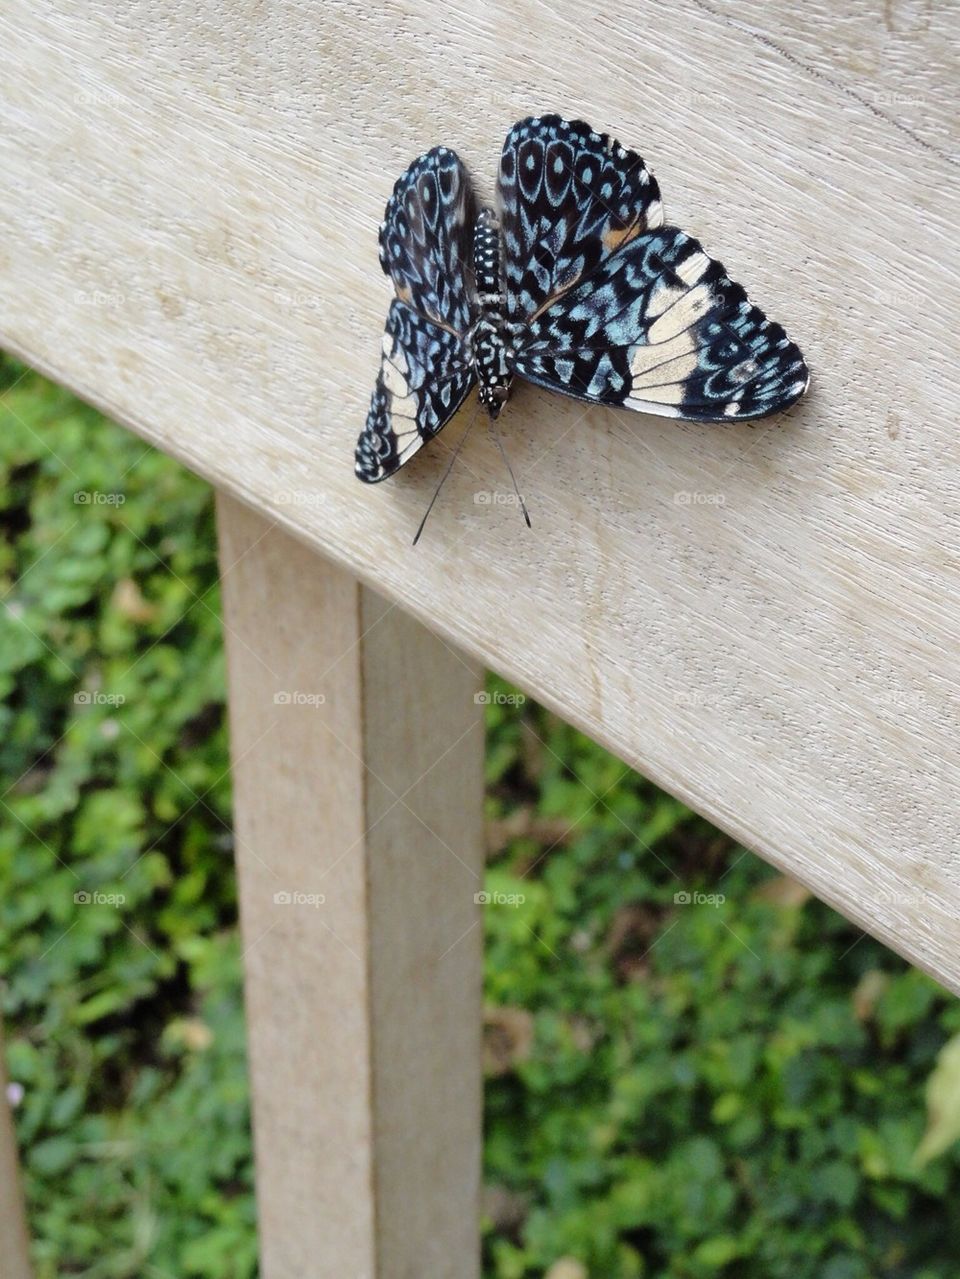 Butterfly on railing